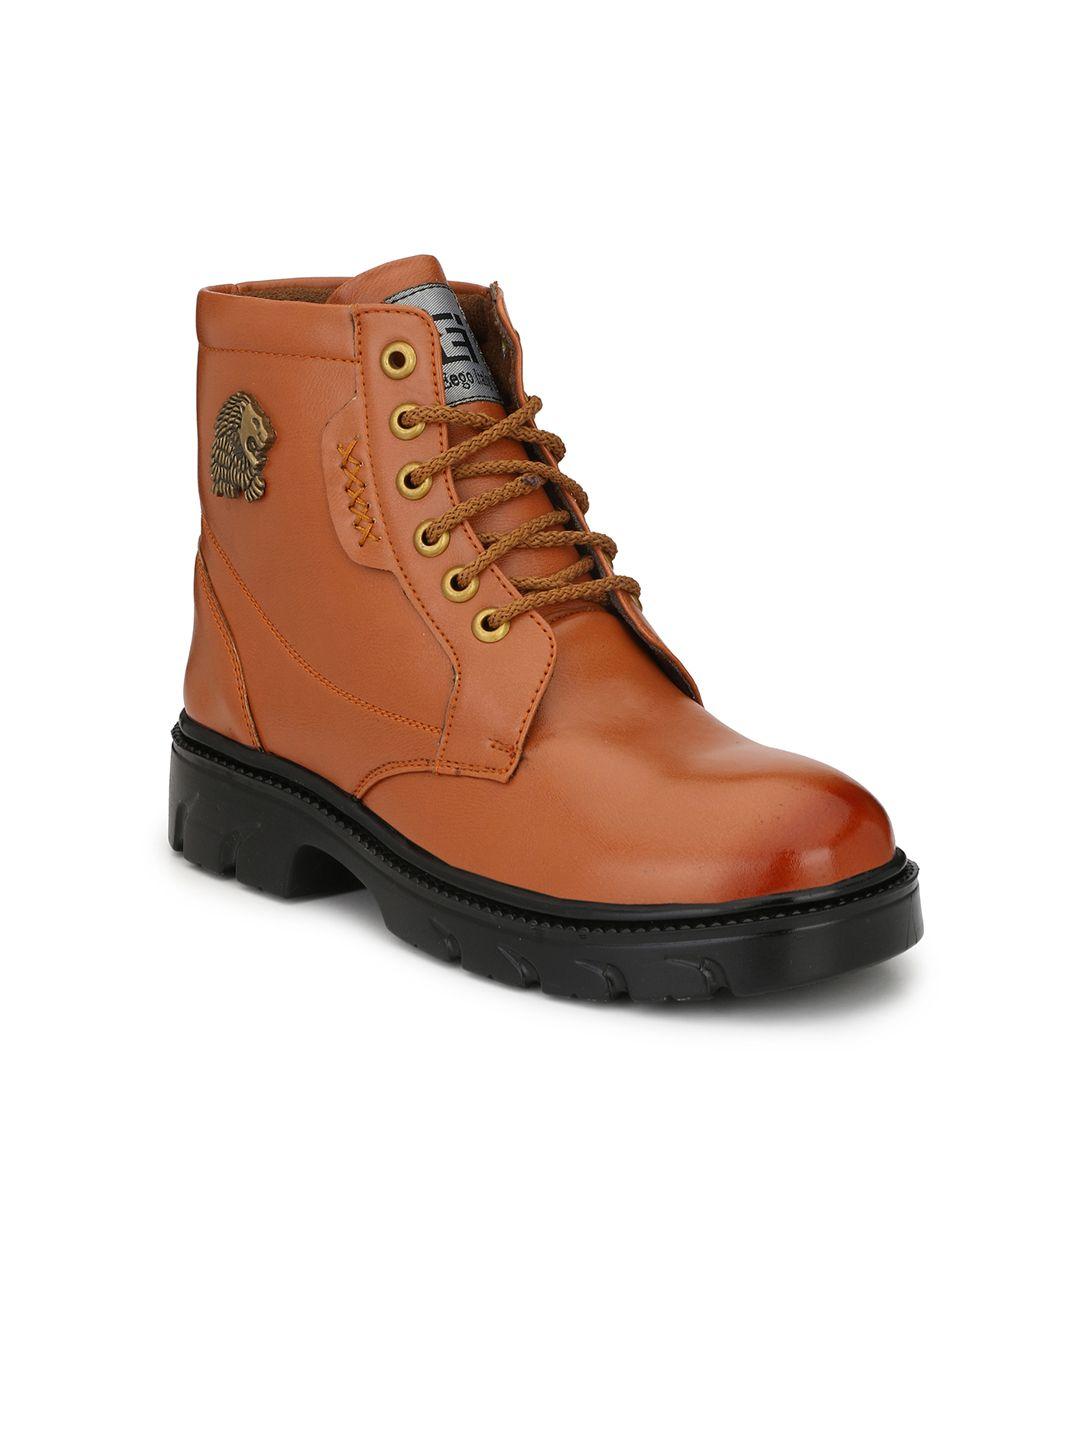 eego italy men tan solid synthetic high-top flat boots